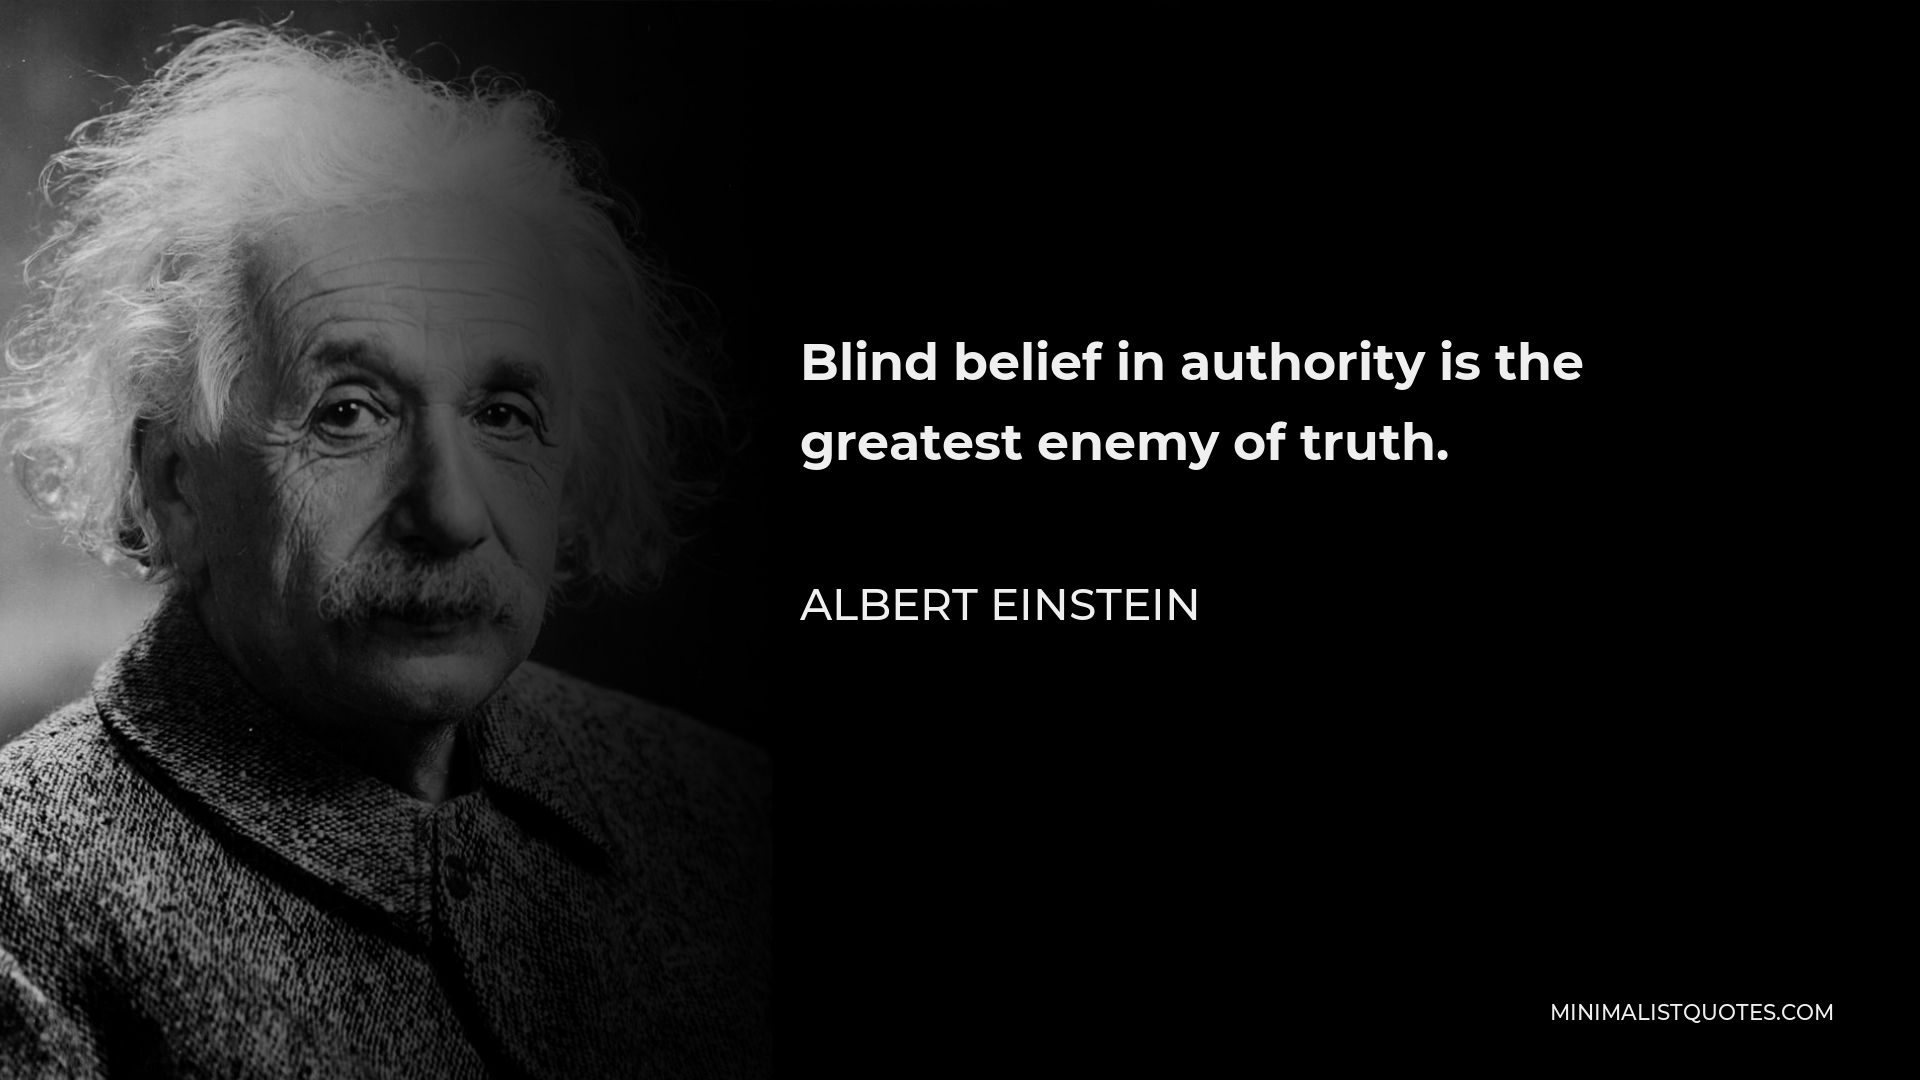 Albert Einstein Quote - Blind belief in authority is the greatest enemy of truth.